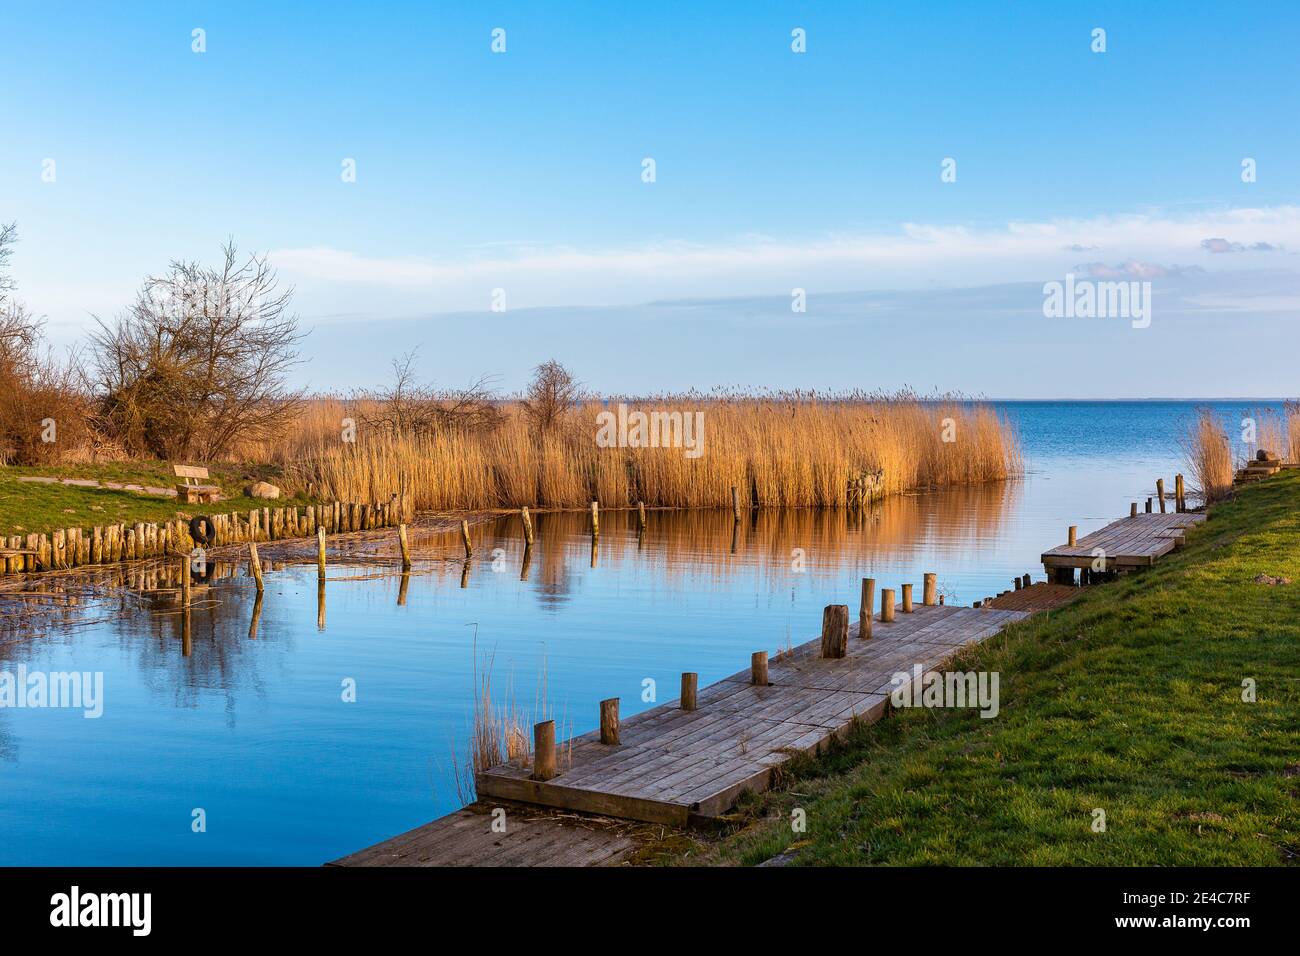 The natural harbor of Stolpe on the island Usedom in the baltic sea. Stock Photo